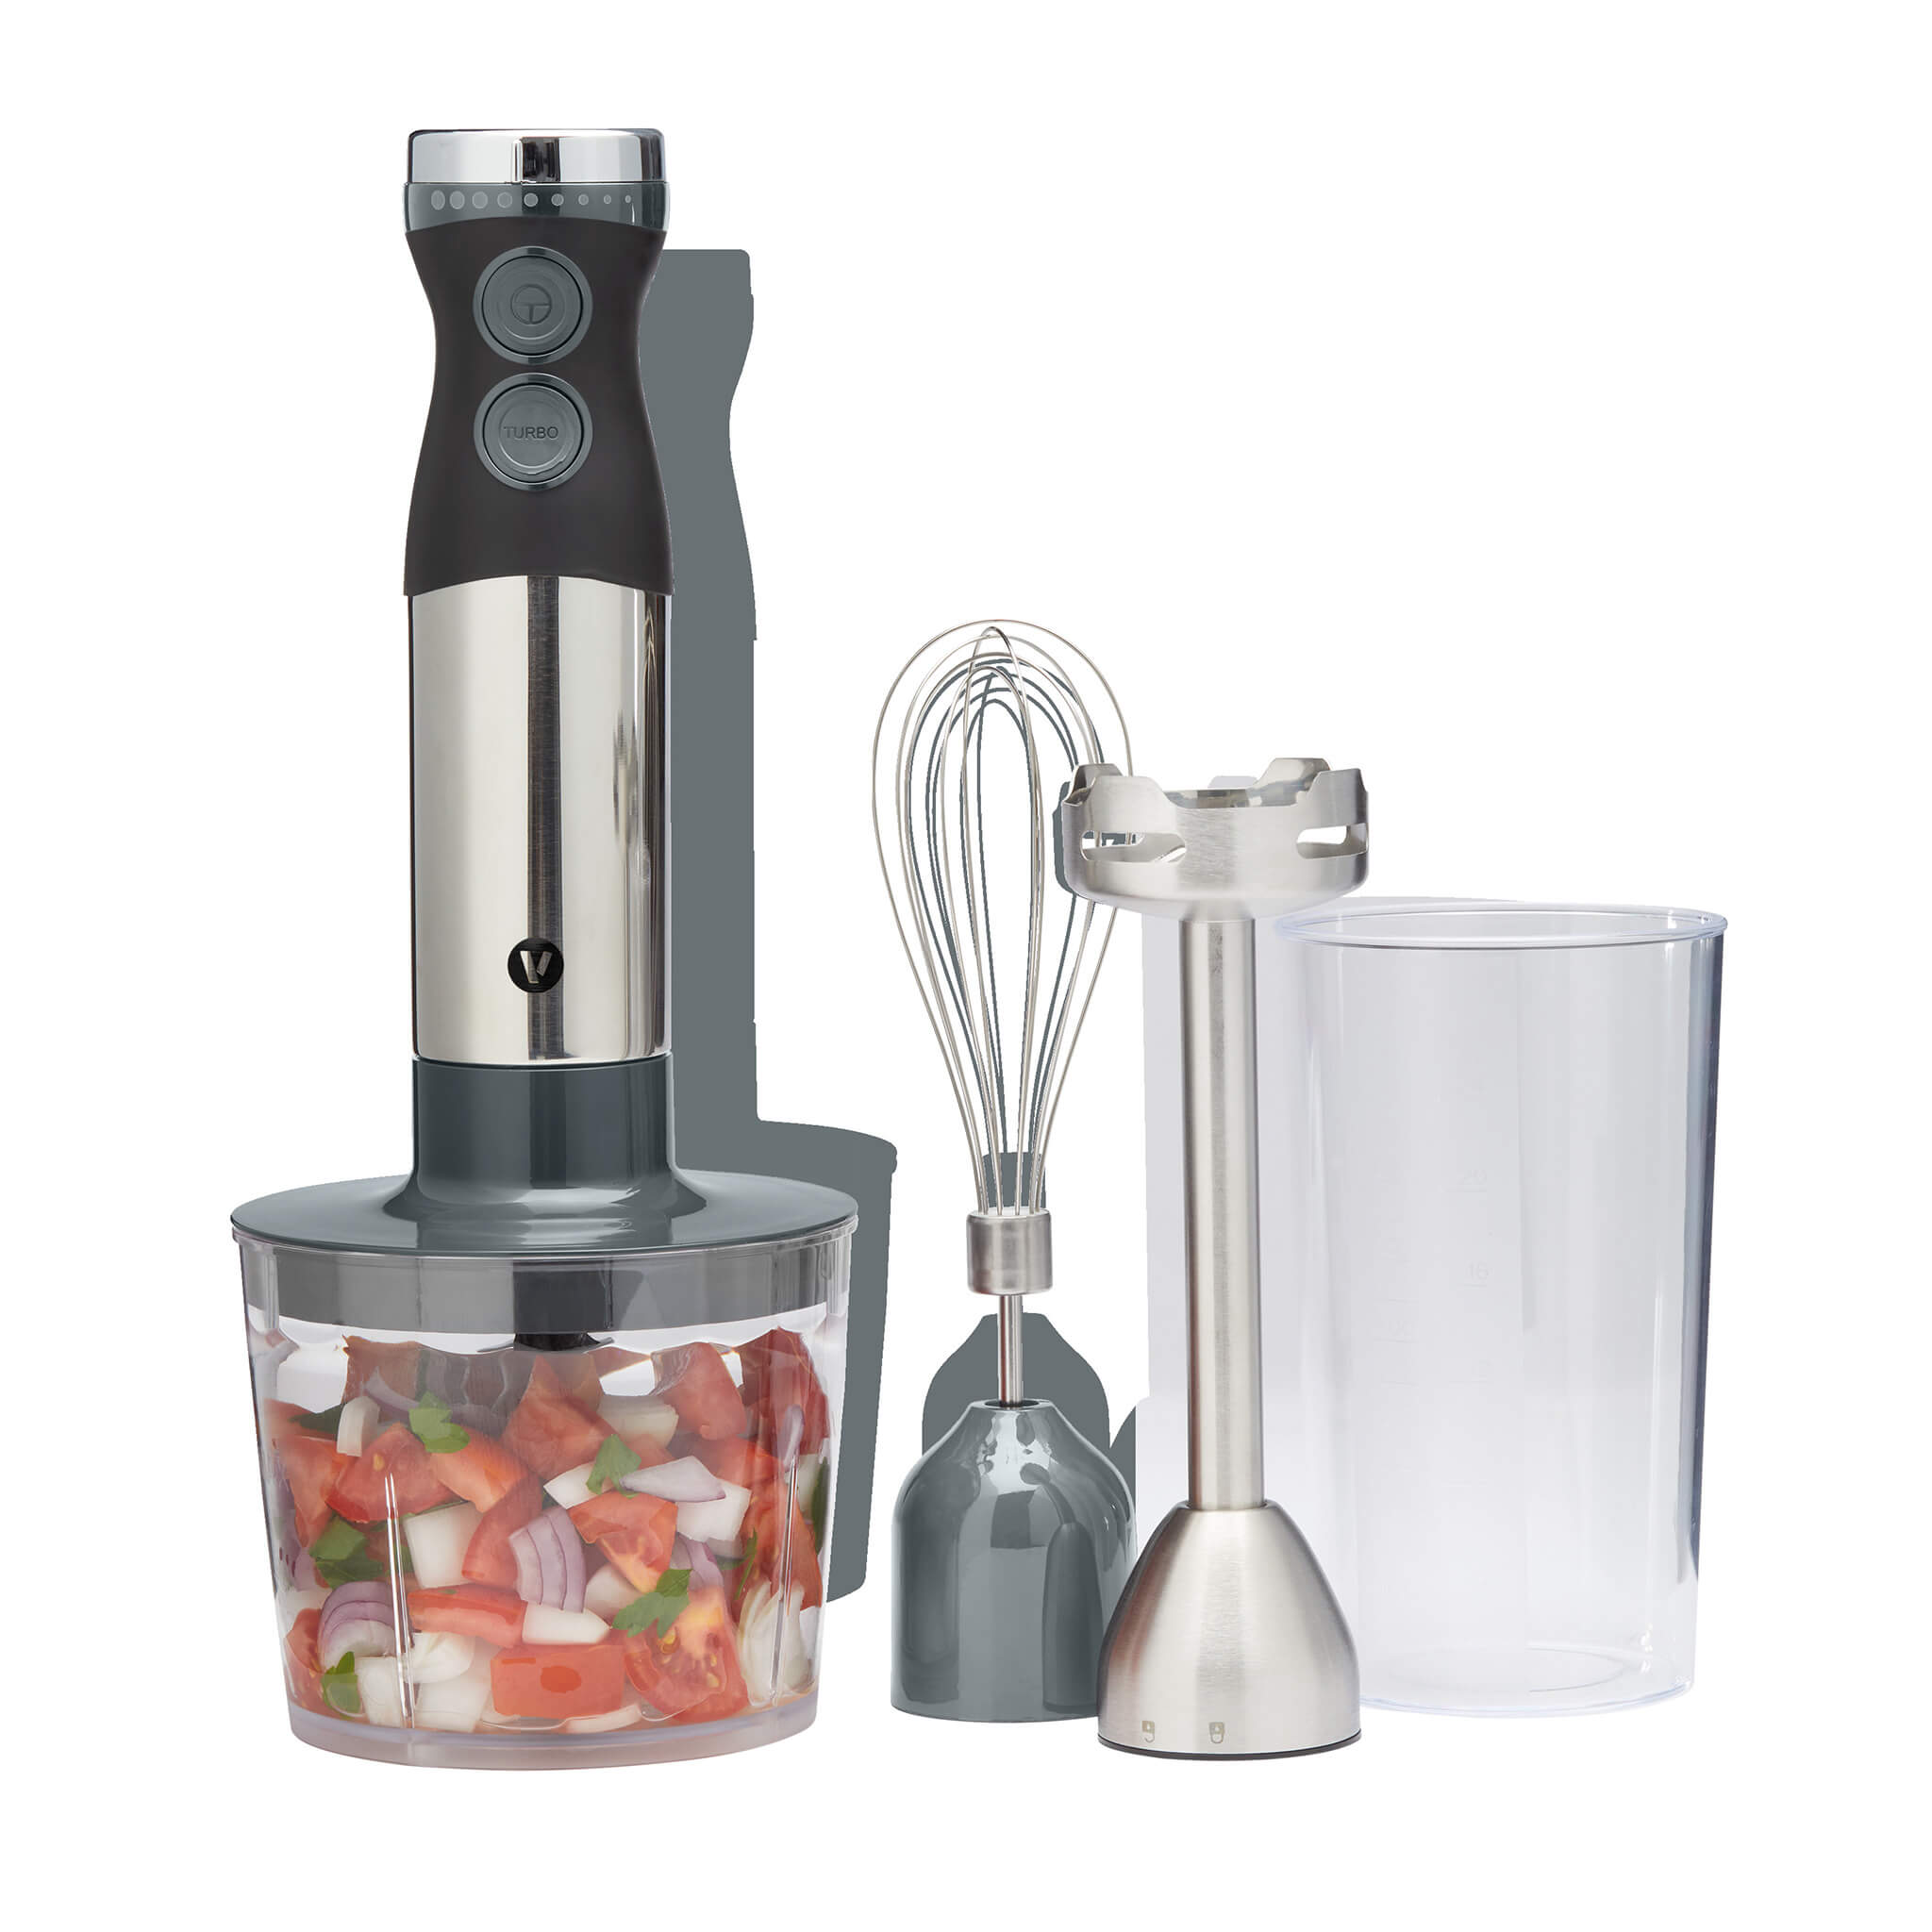 Vida Sana Immersion Blender Sizzle, 𝗩𝗶𝗱𝗮 𝗦𝗮𝗻𝗮 𝟰-𝗶𝗻-𝟭  𝗜𝗺𝗺𝗲𝗿𝘀𝗶𝗼𝗻 𝗕𝗹𝗲𝗻𝗱𝗲𝗿 - Blend, mash, whip and chop food with an  easy, one-hand operation. Powerful 400-watt motor features variable  speeds